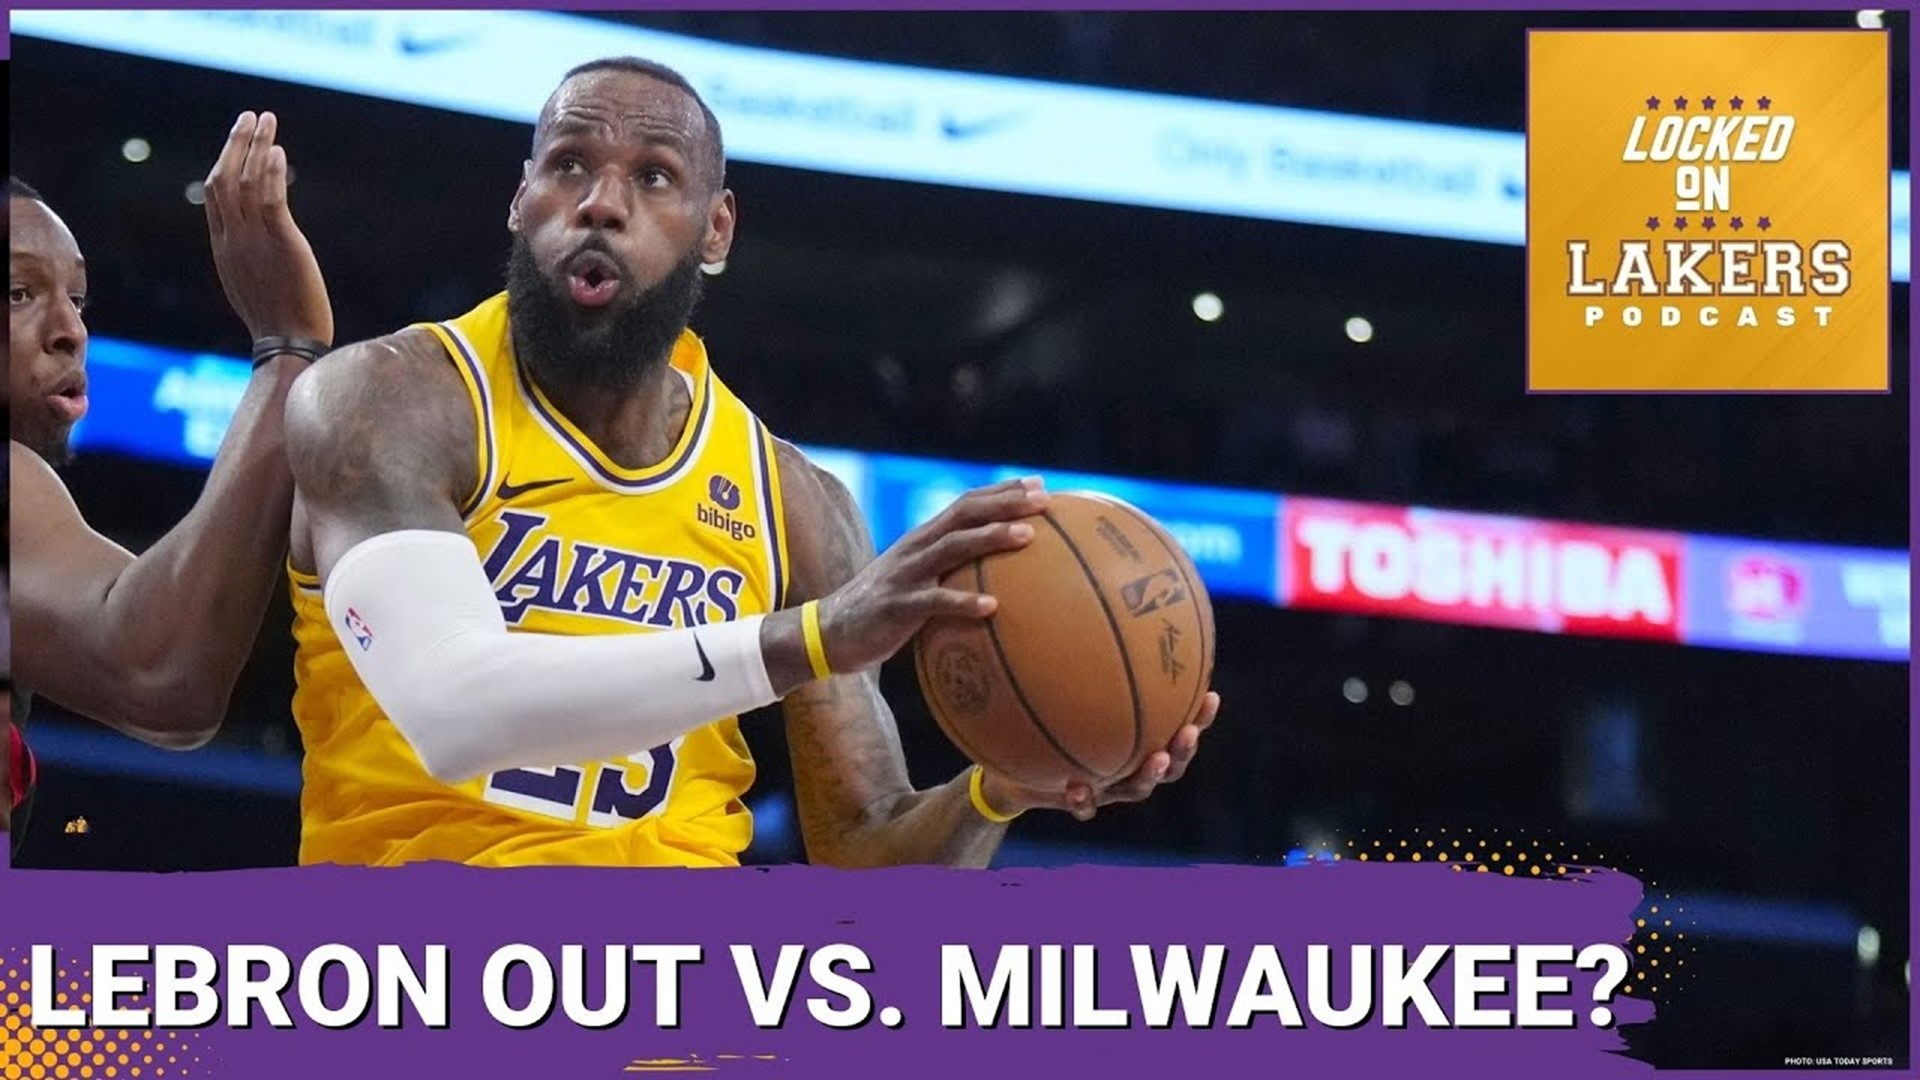 The Lakers kick off a six game road trip tonight in Milwaukee. Normally this sort of thing would be looked on with some bit of dread